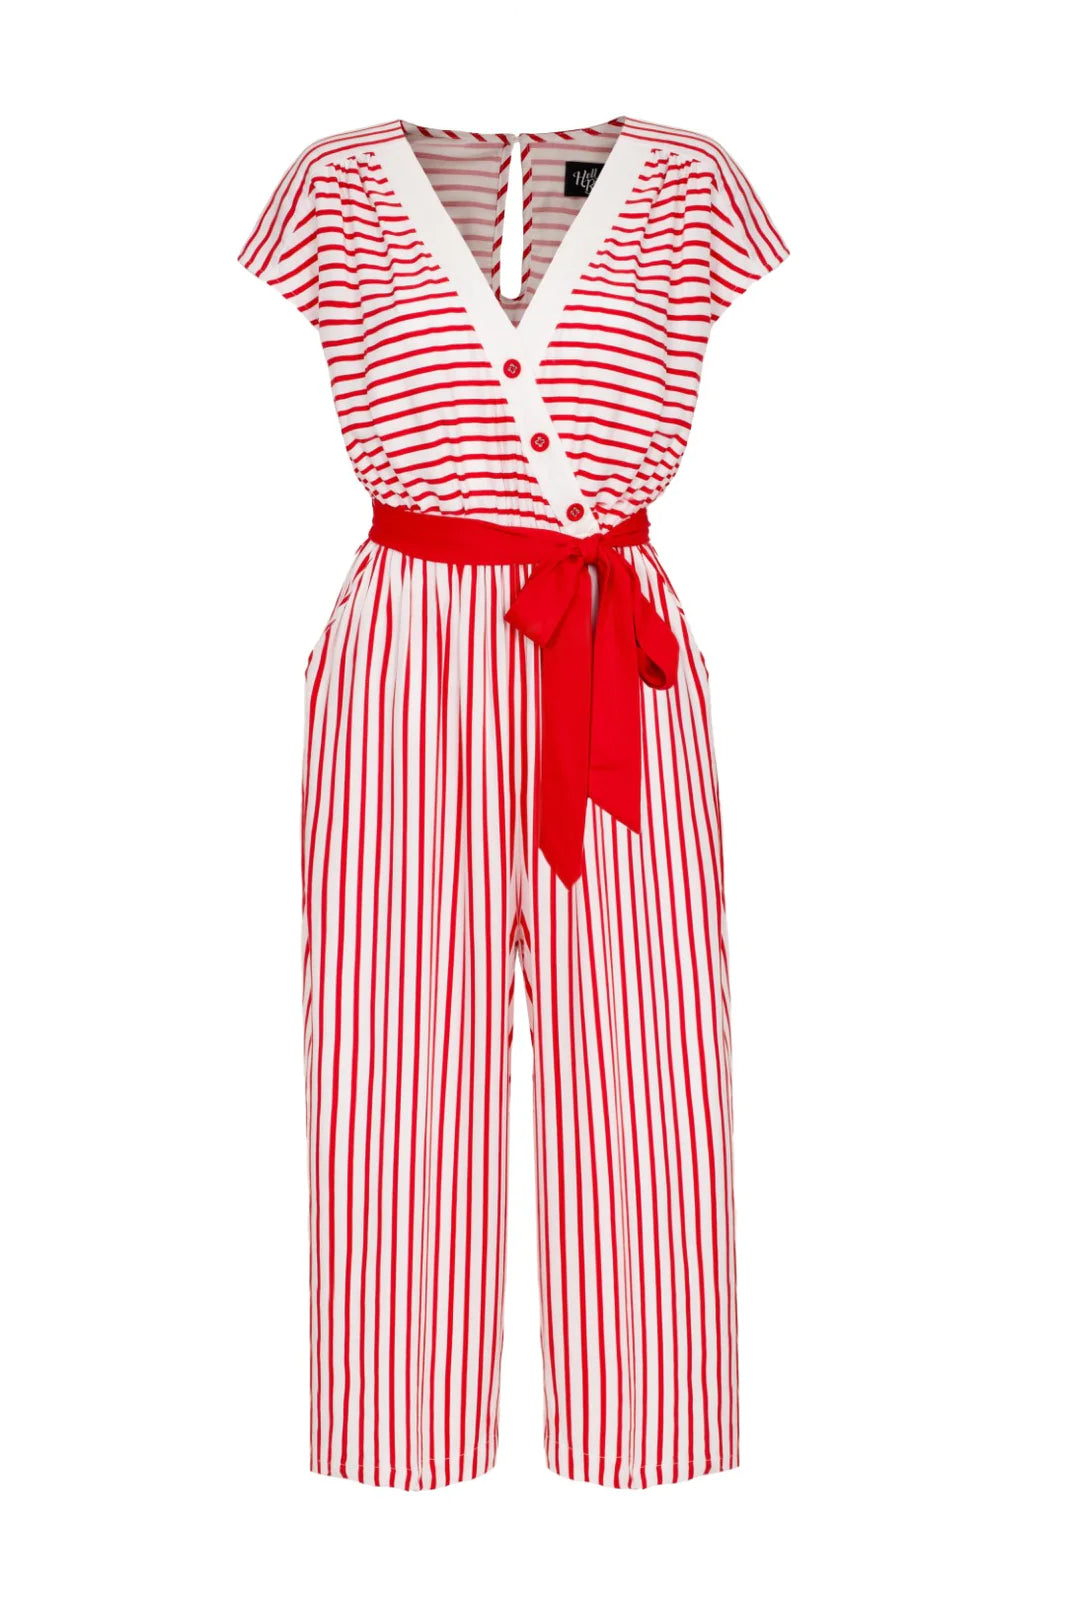 The Red and white striped Ahoy jumpsuit on a plain background